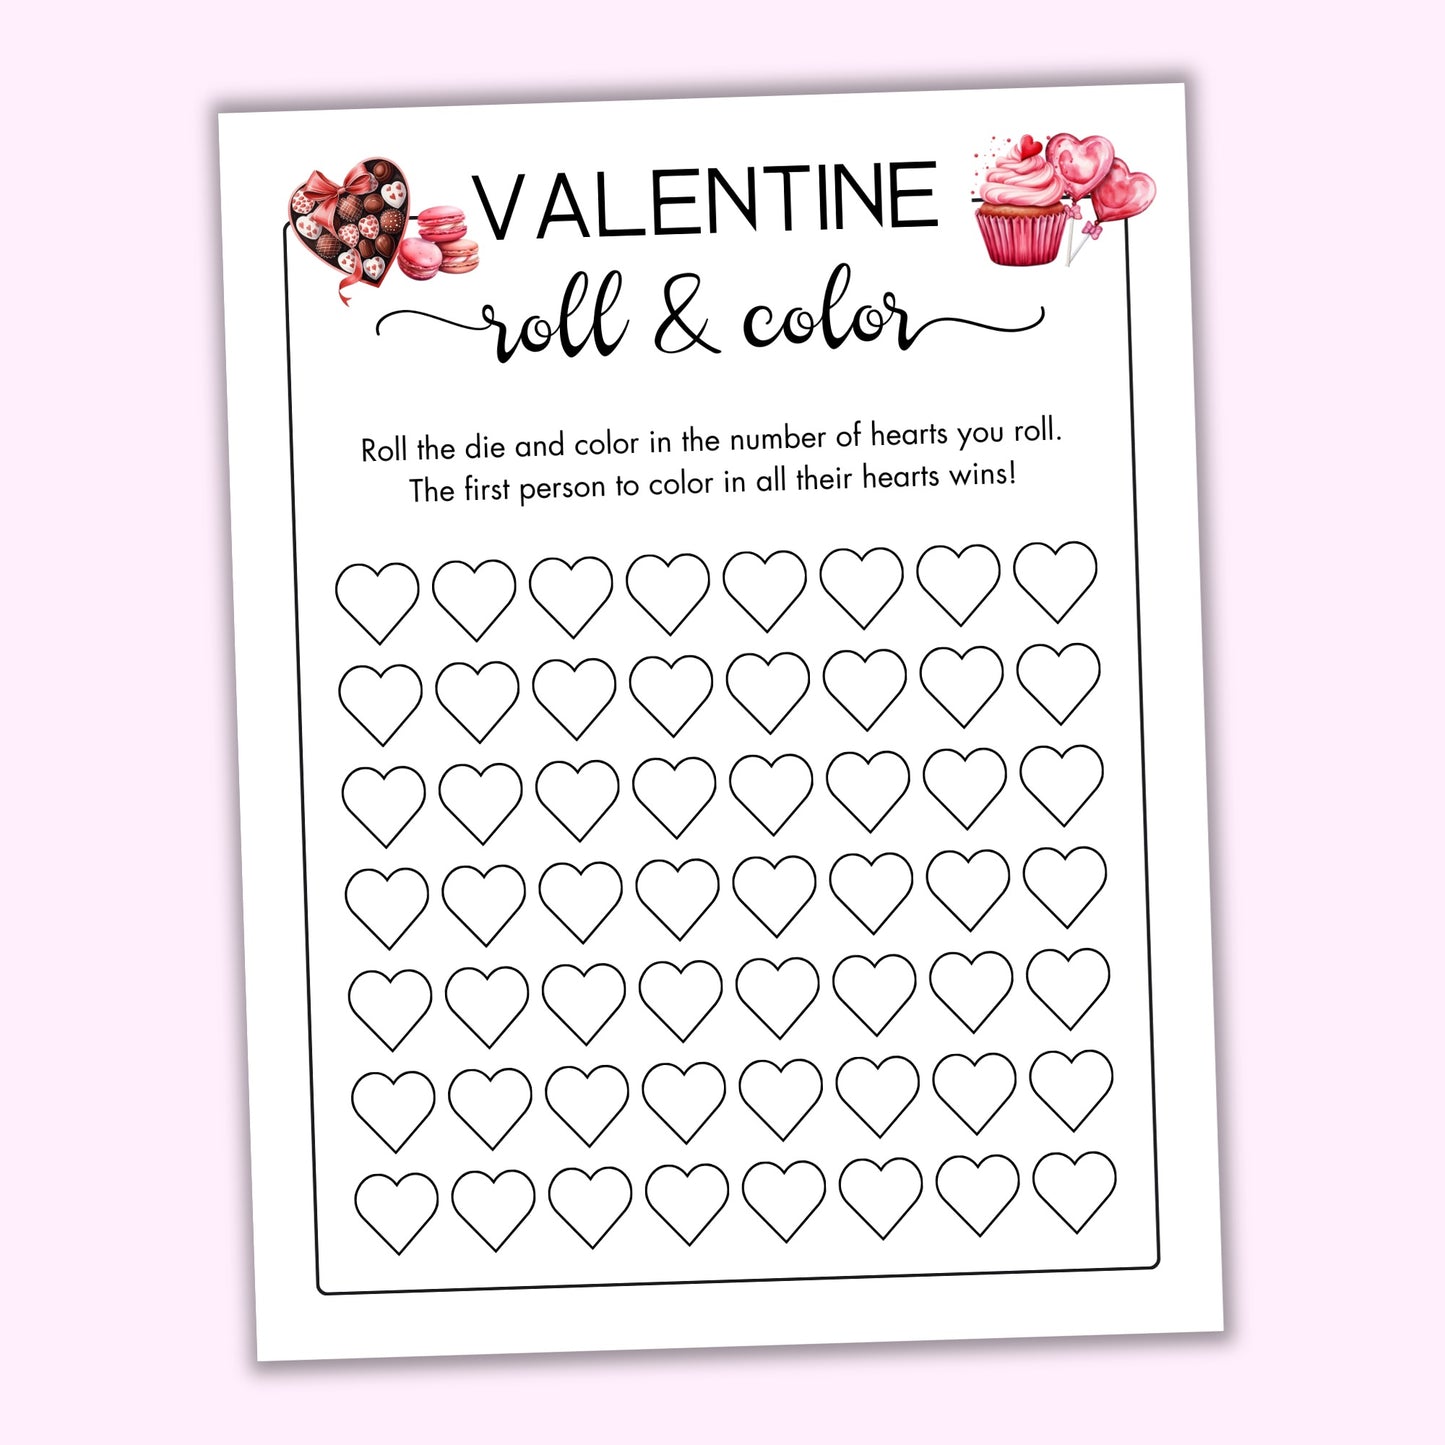 Valentine Roll & Colour (2 Spelling Variants)